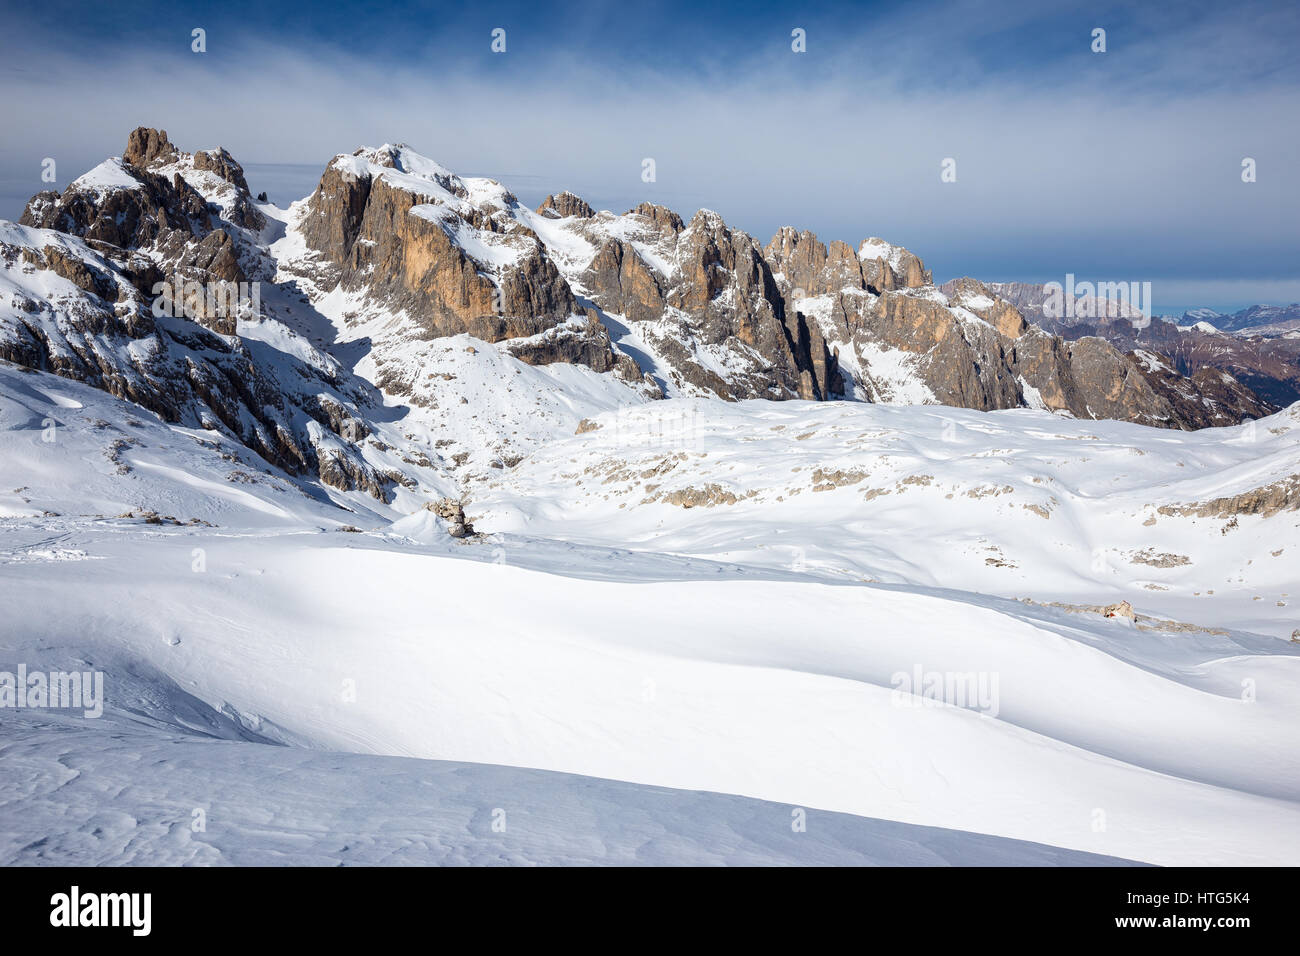 The Pale di San Martino mountain group, snow cover and north peaks. The Dolomites. Italian Alps. Europe. Stock Photo